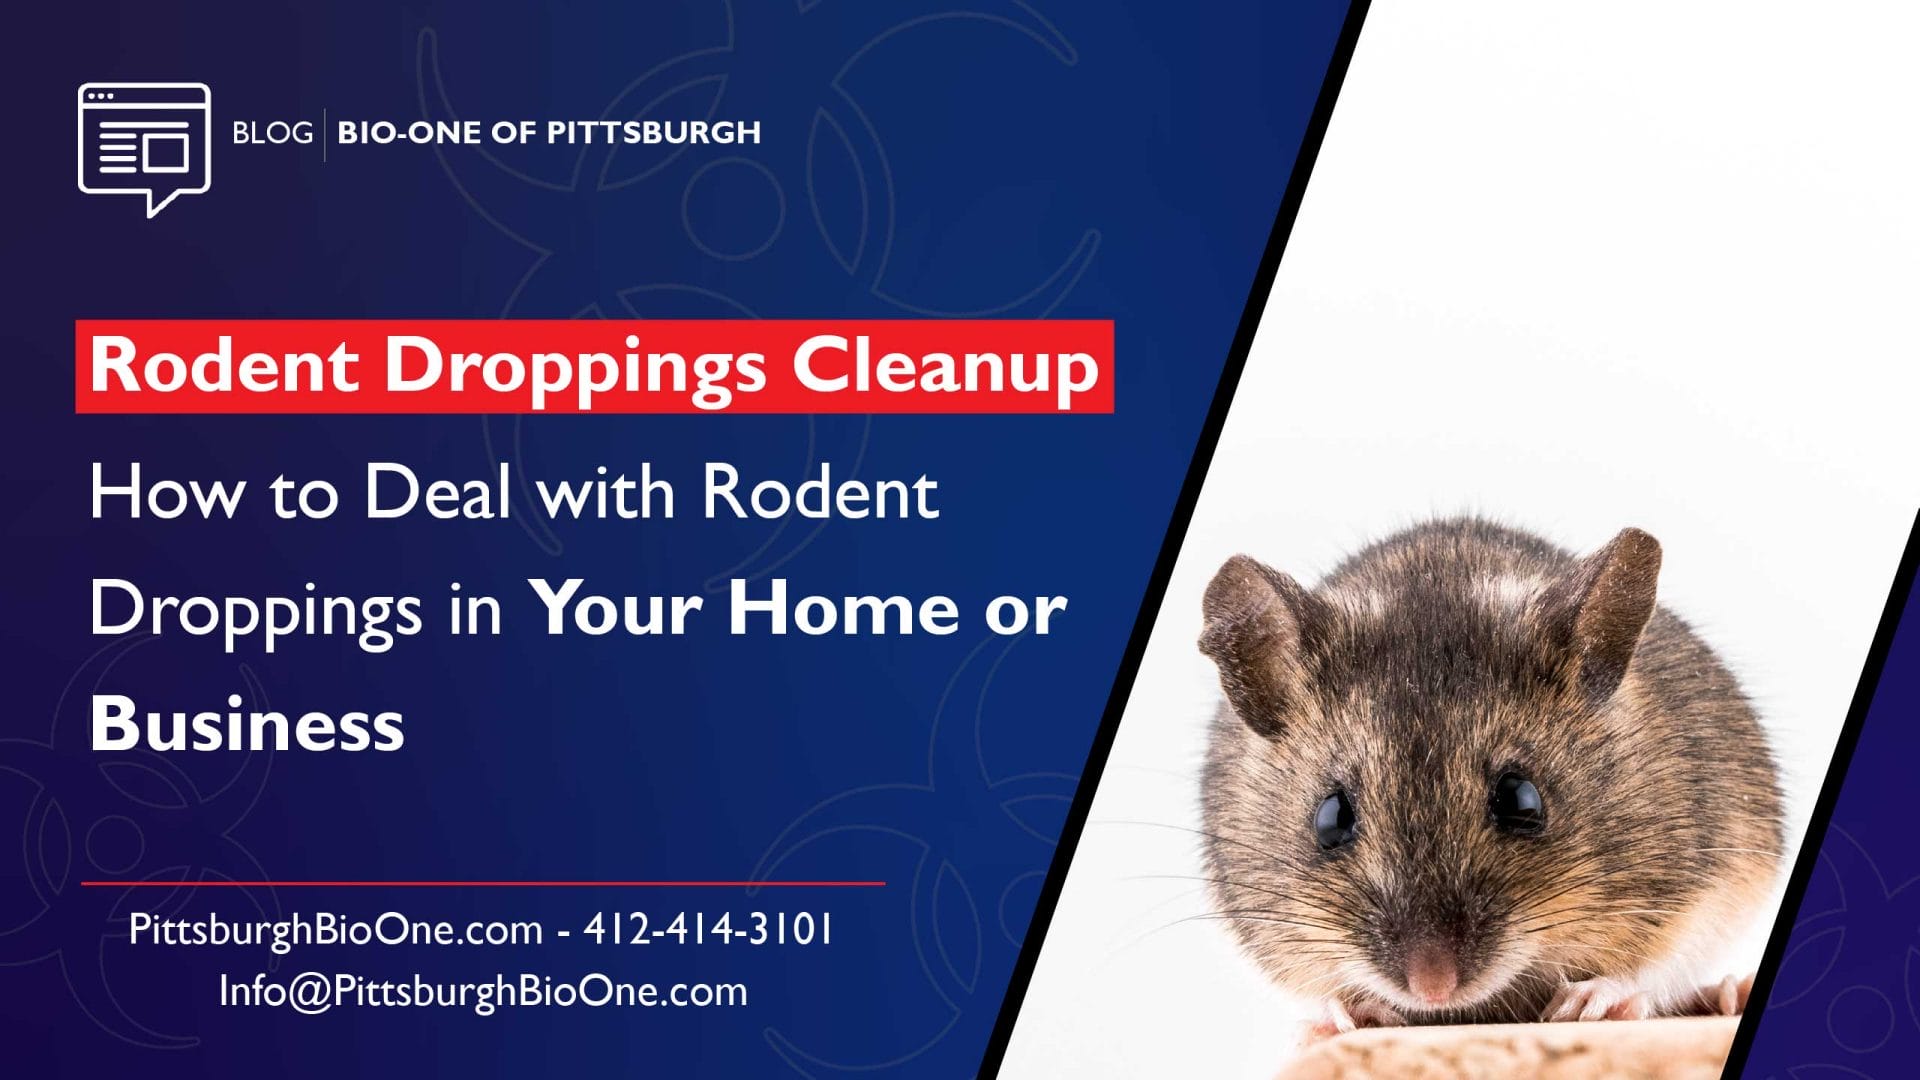 How to Deal with Rodent Droppings in Your Home or Business